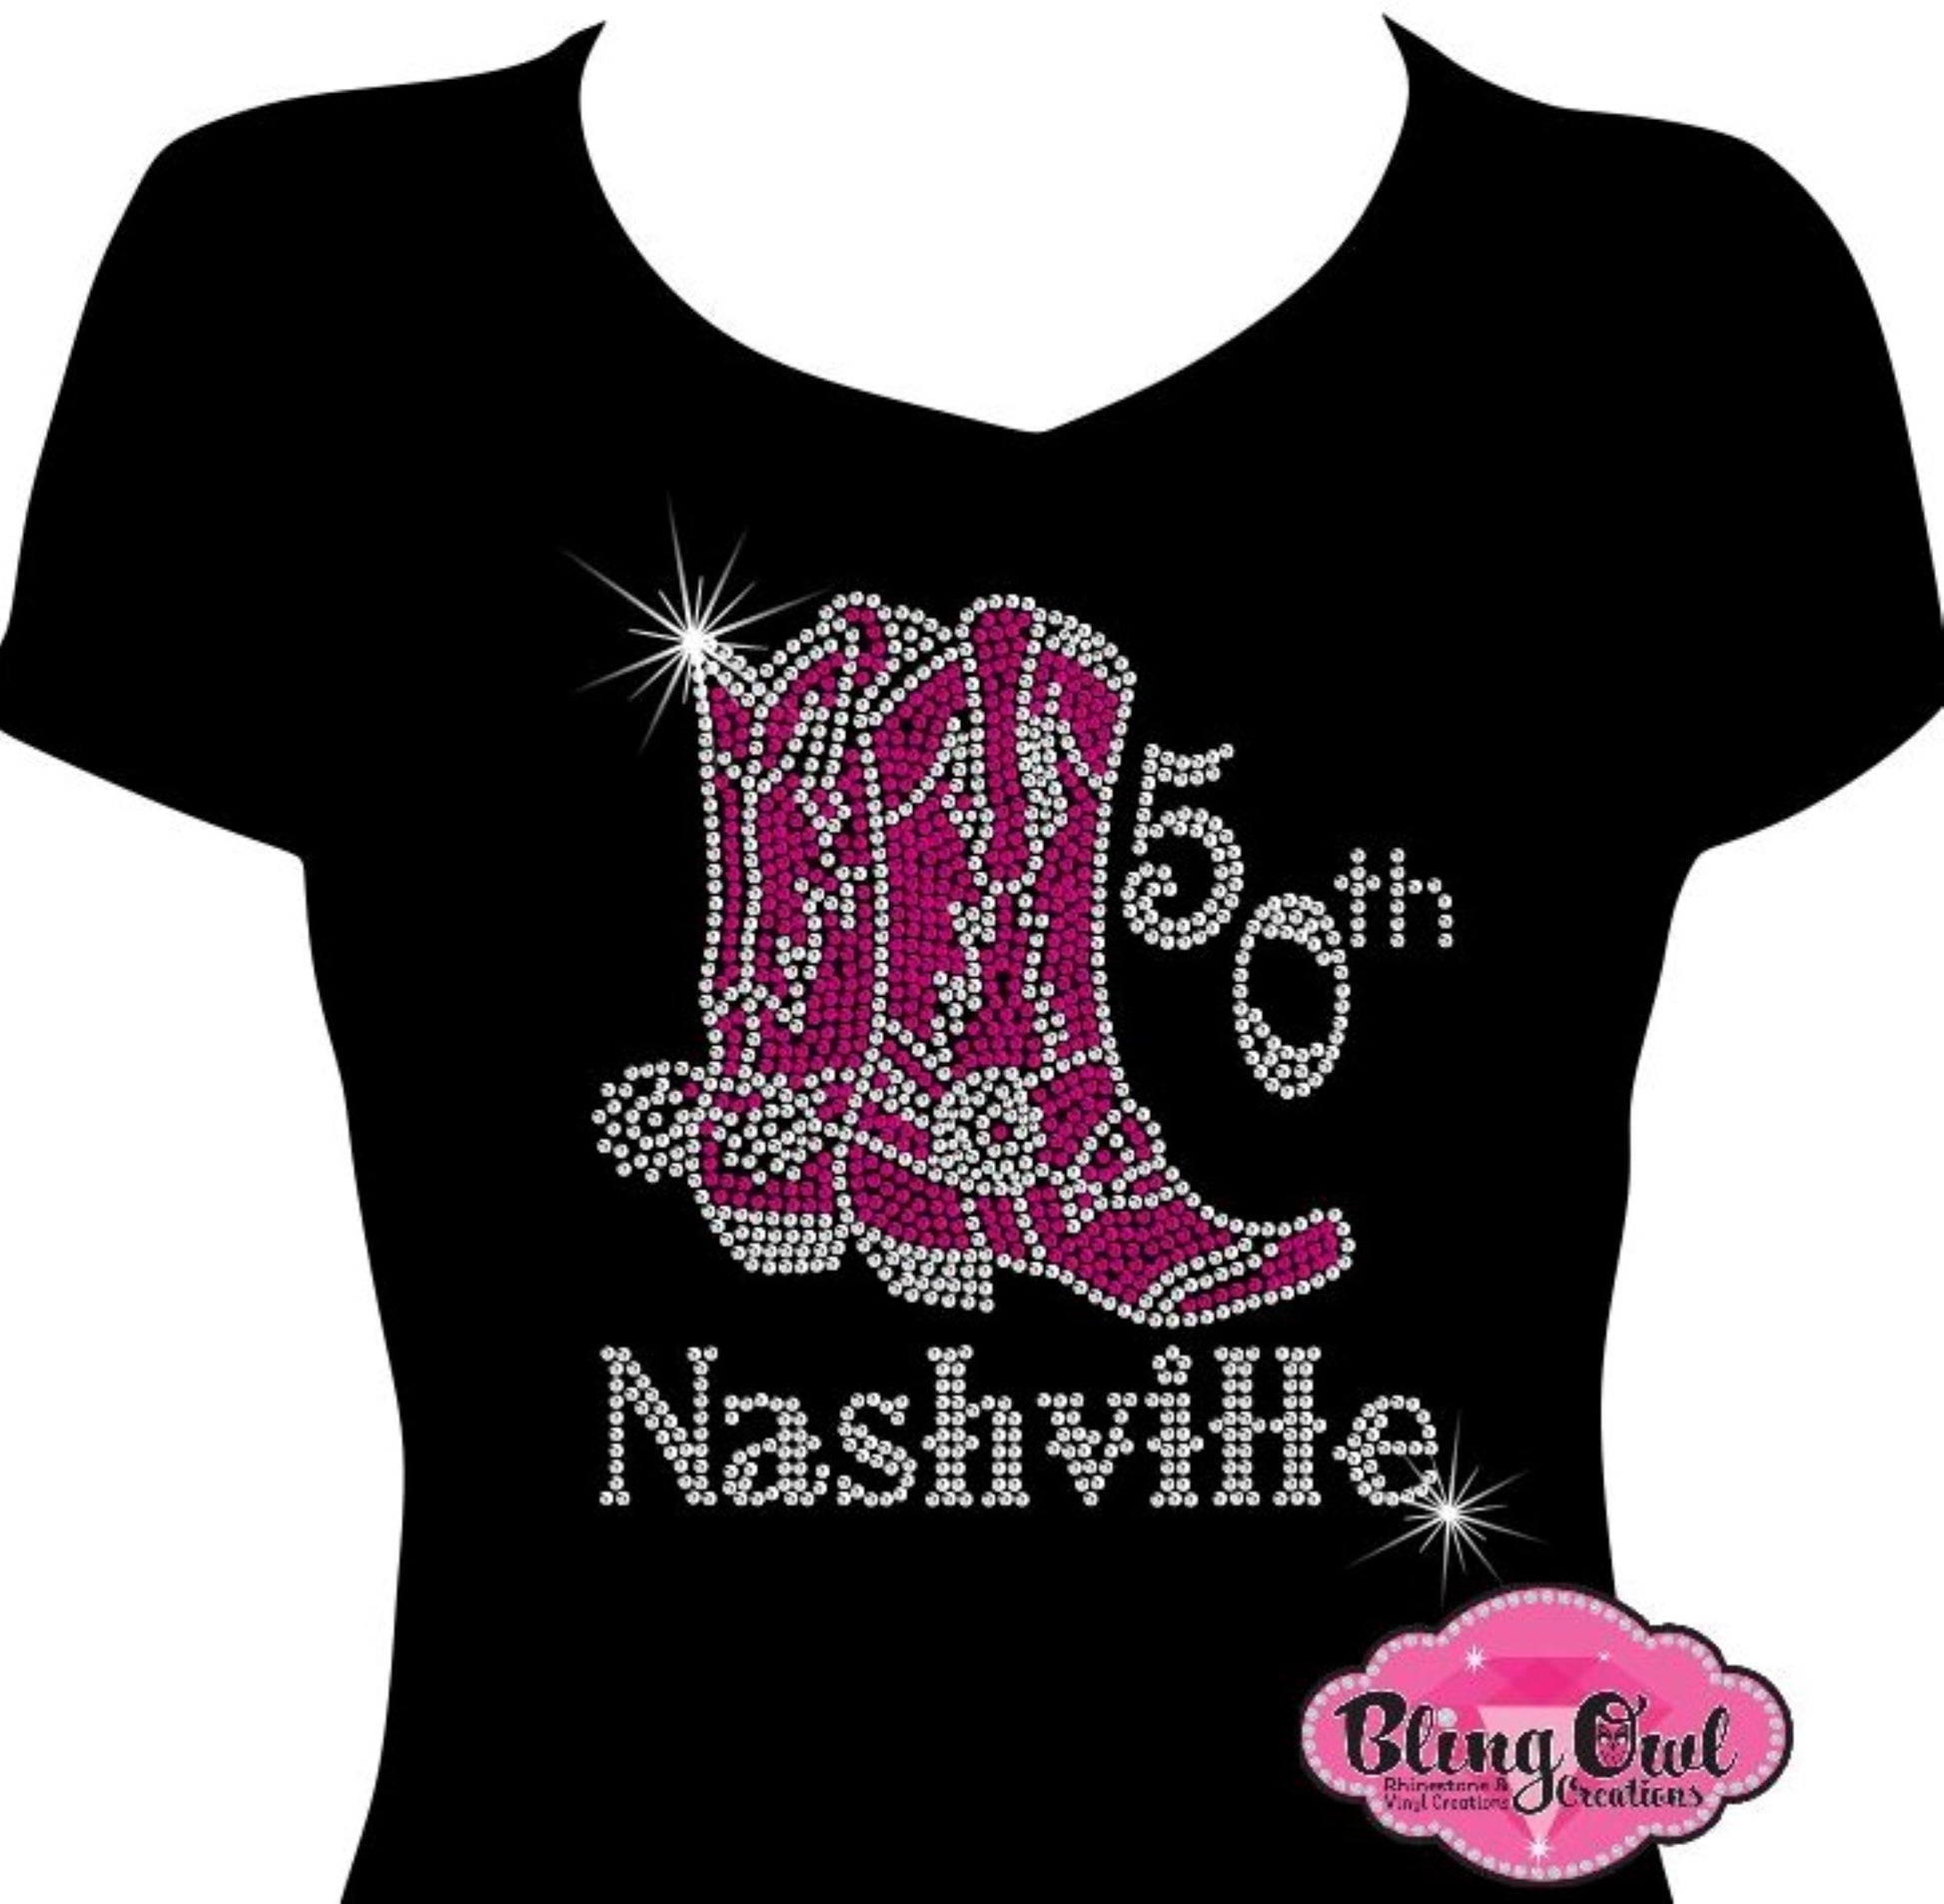 50th_ladies_birthday_outfit birthday_glam customized_rhinestone_designed_tees nashville_boots sparkle_outfit gift_ideas gifts_for_her birthday_party outfit chic_classy wear trendy_cute_ladies_shirt ladies_bling_tshirt birthday_bling party_glam